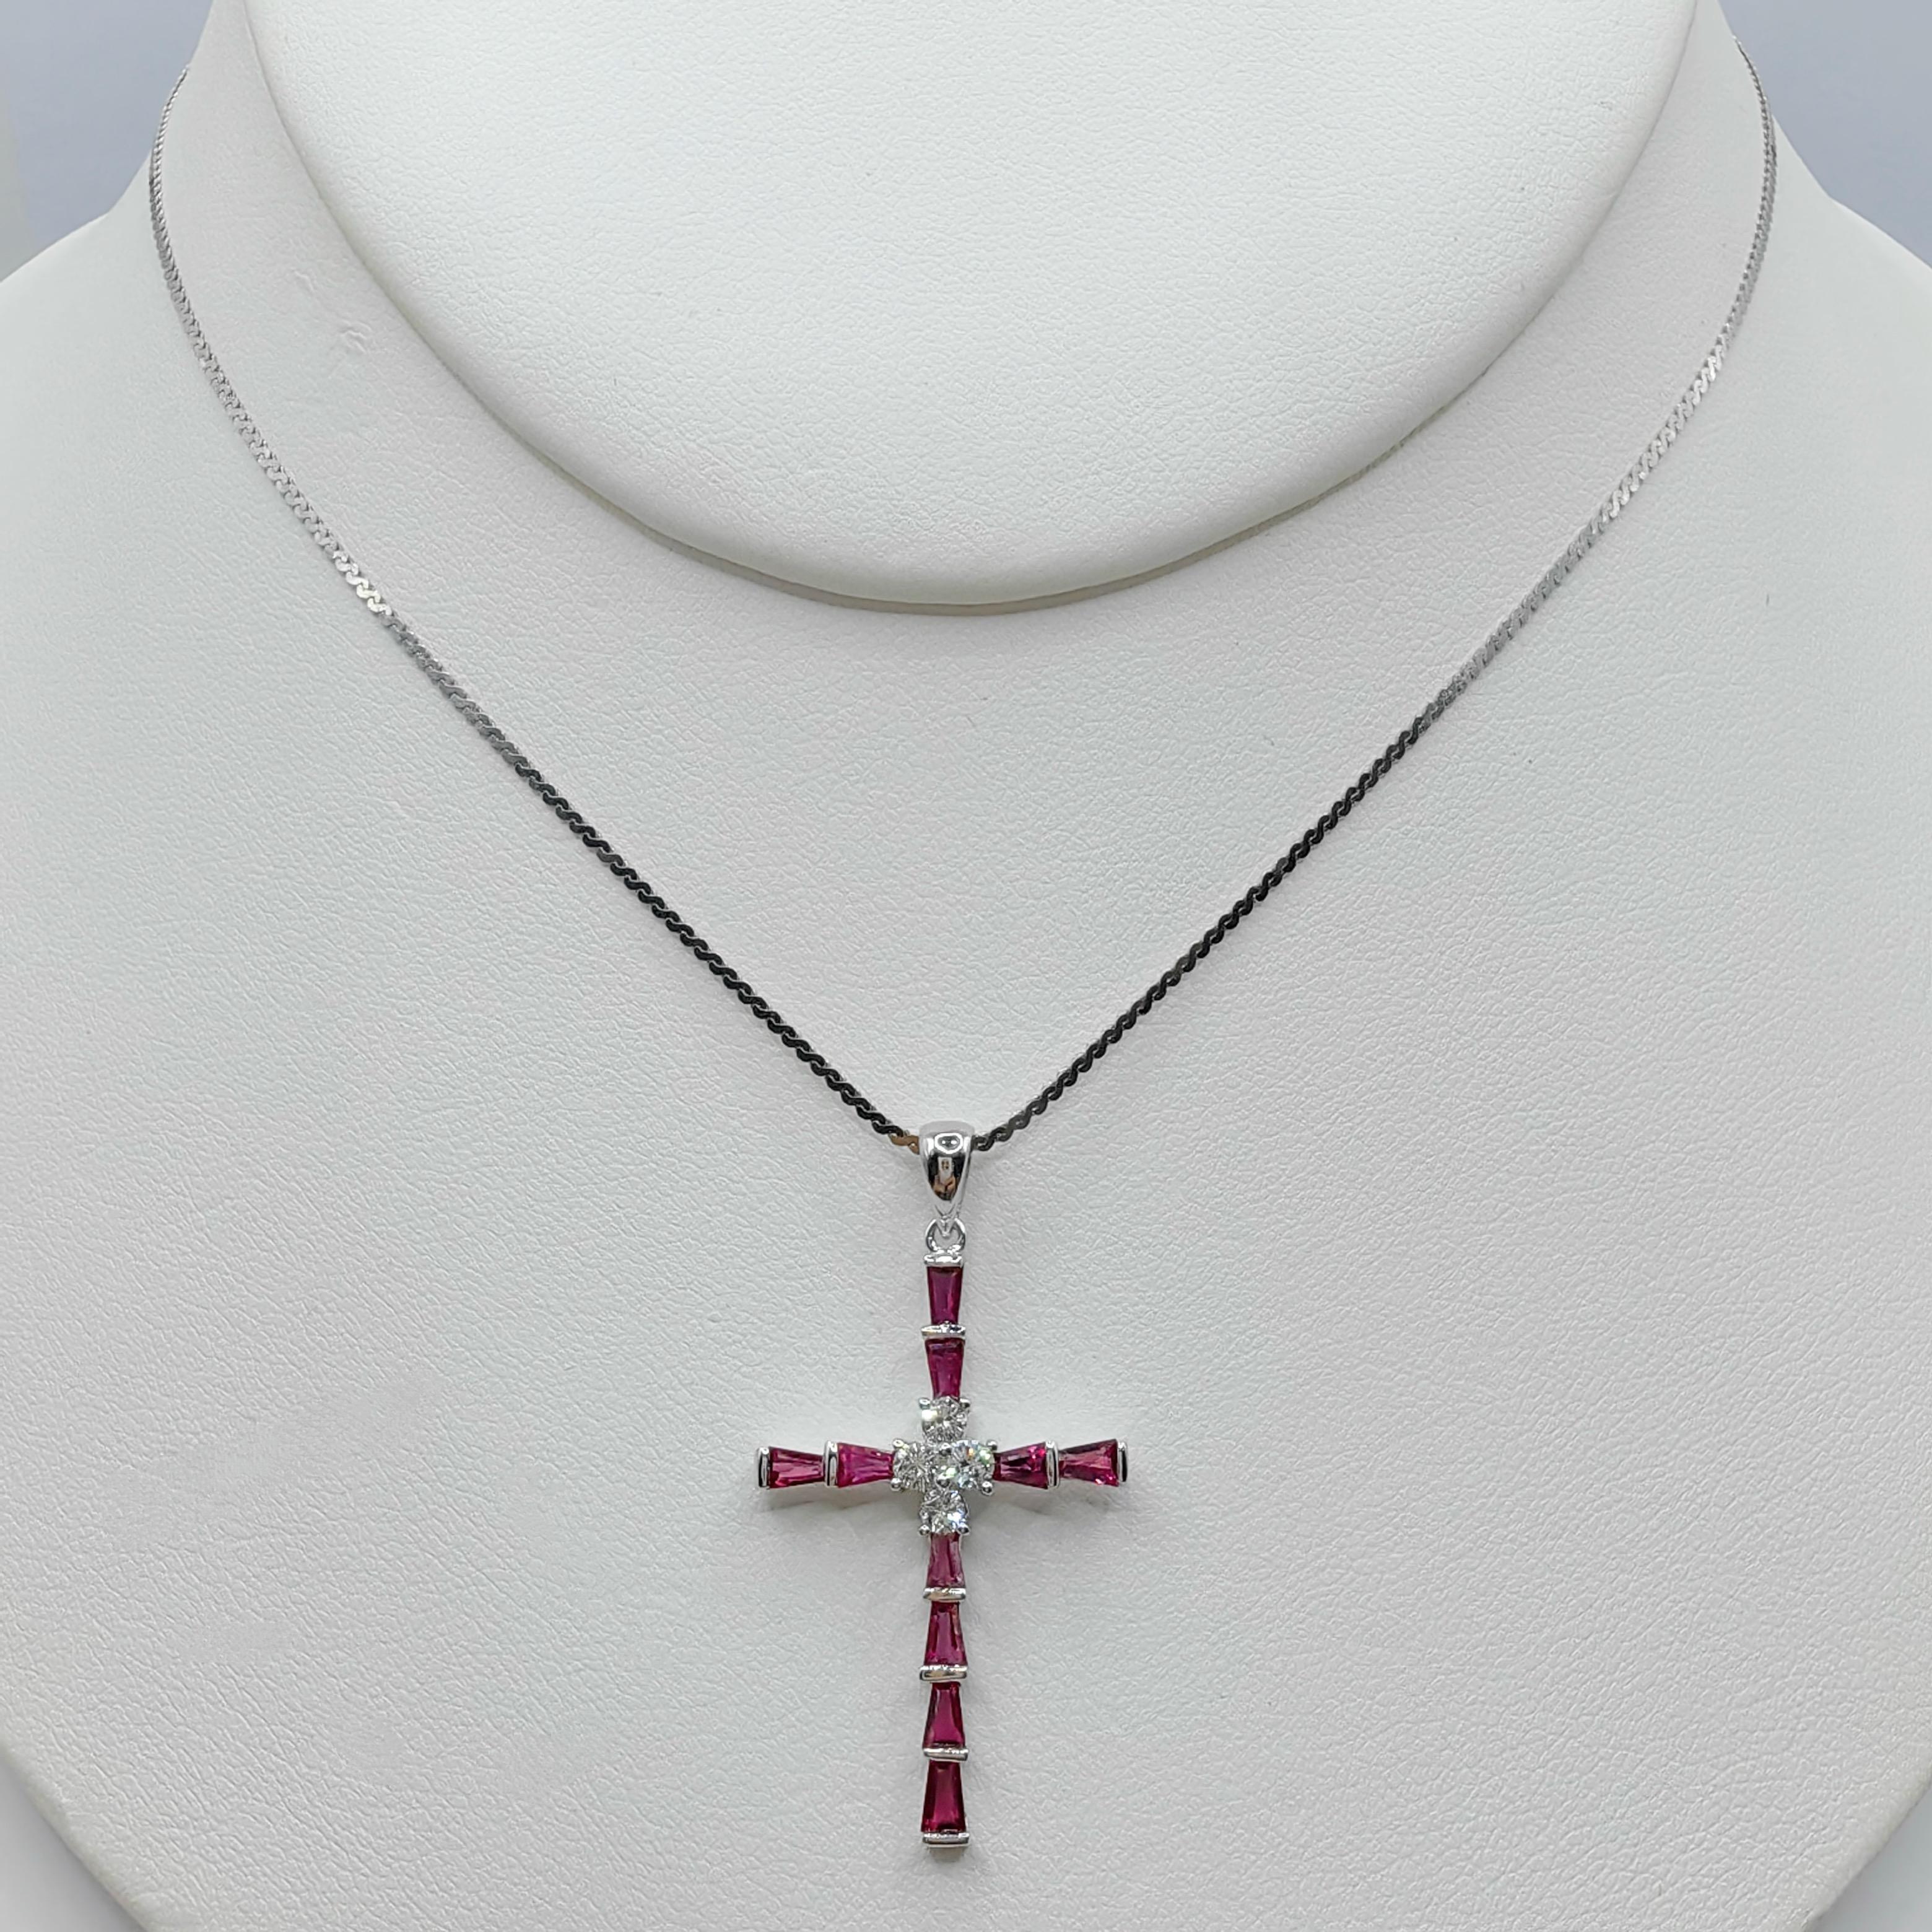 1.26ct Pigeon Blood Ruby & Diamond Cross Necklace Pendant in 18K White Gold For Sale 3